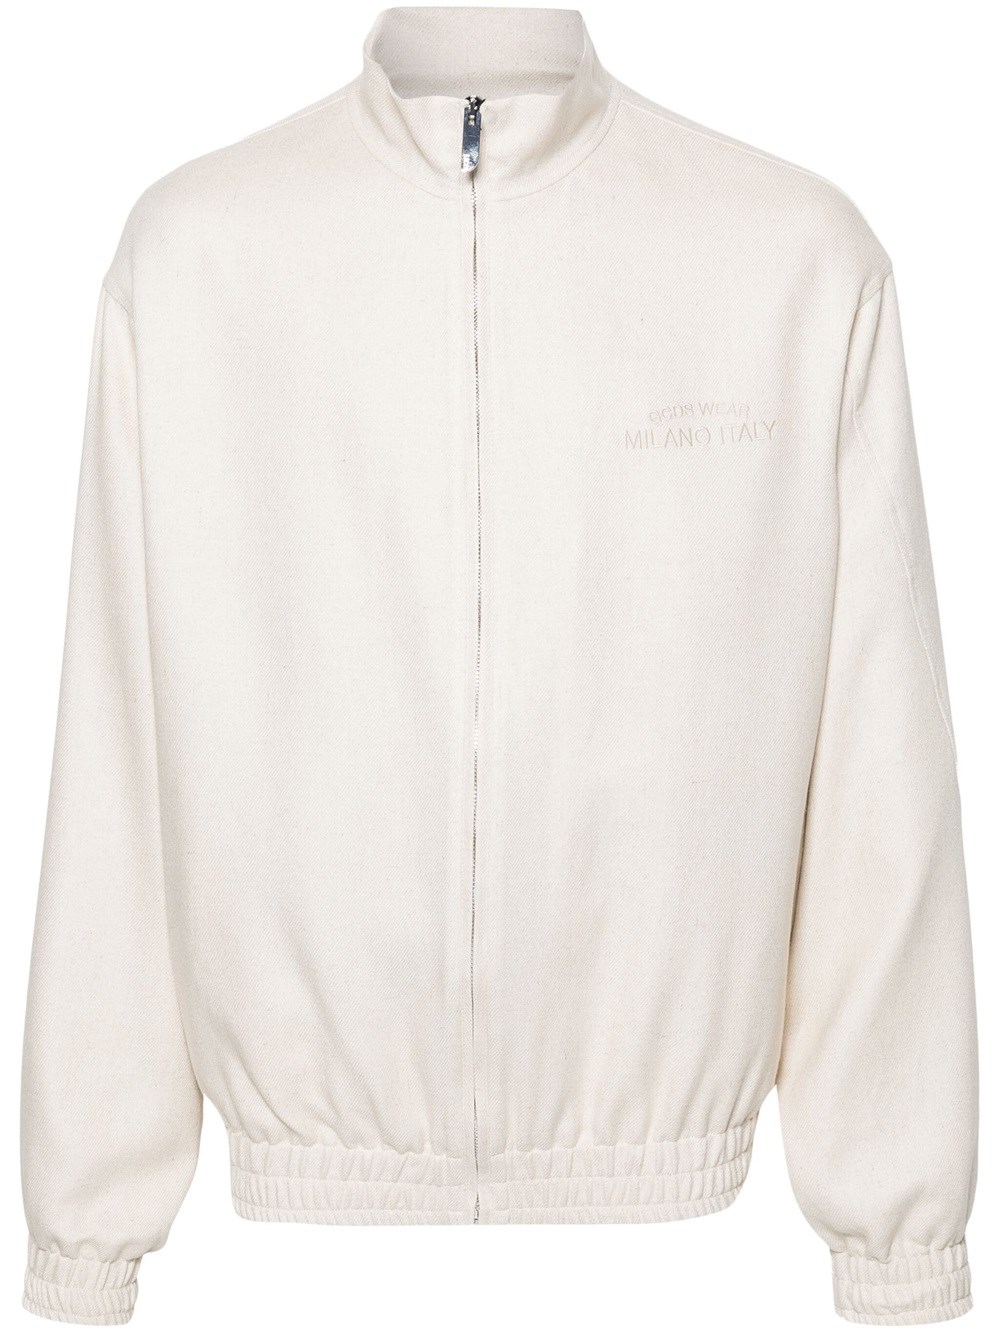 Shop Gcds Sports Jacket With Embroidery In White